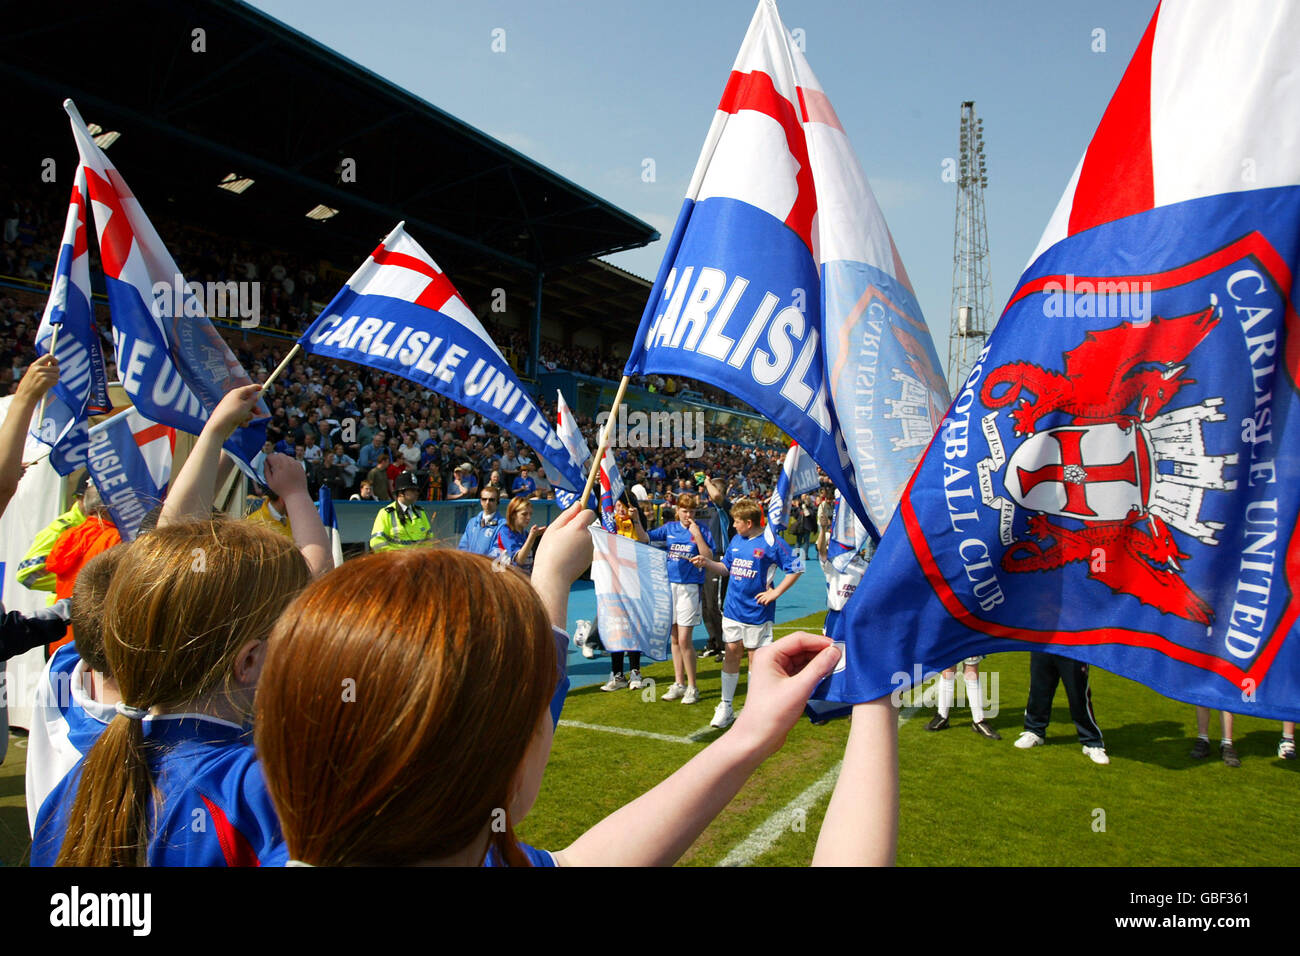 Carlisle United flags are waved as the teams come onto the pitch Stock Photo